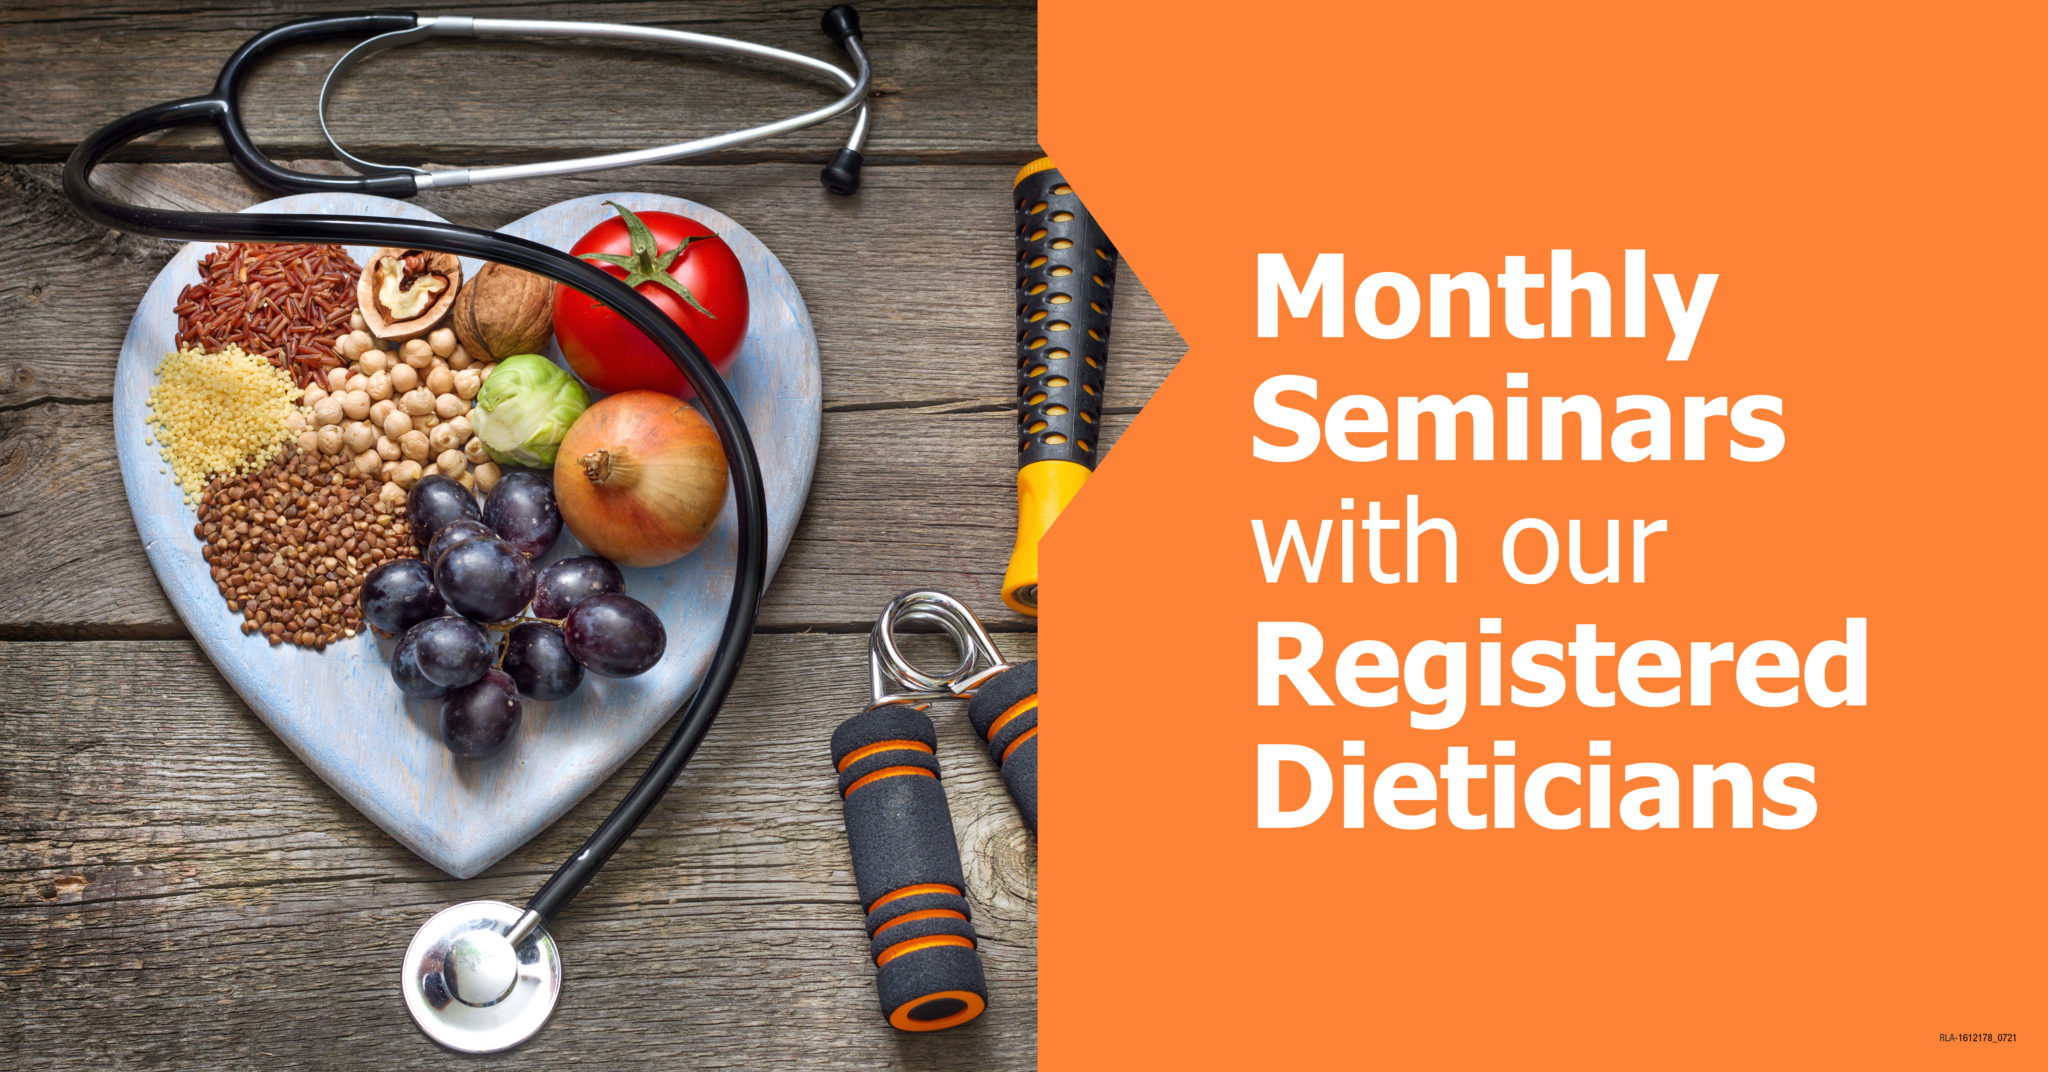 Monthly Seminars with our Registered Dieticians